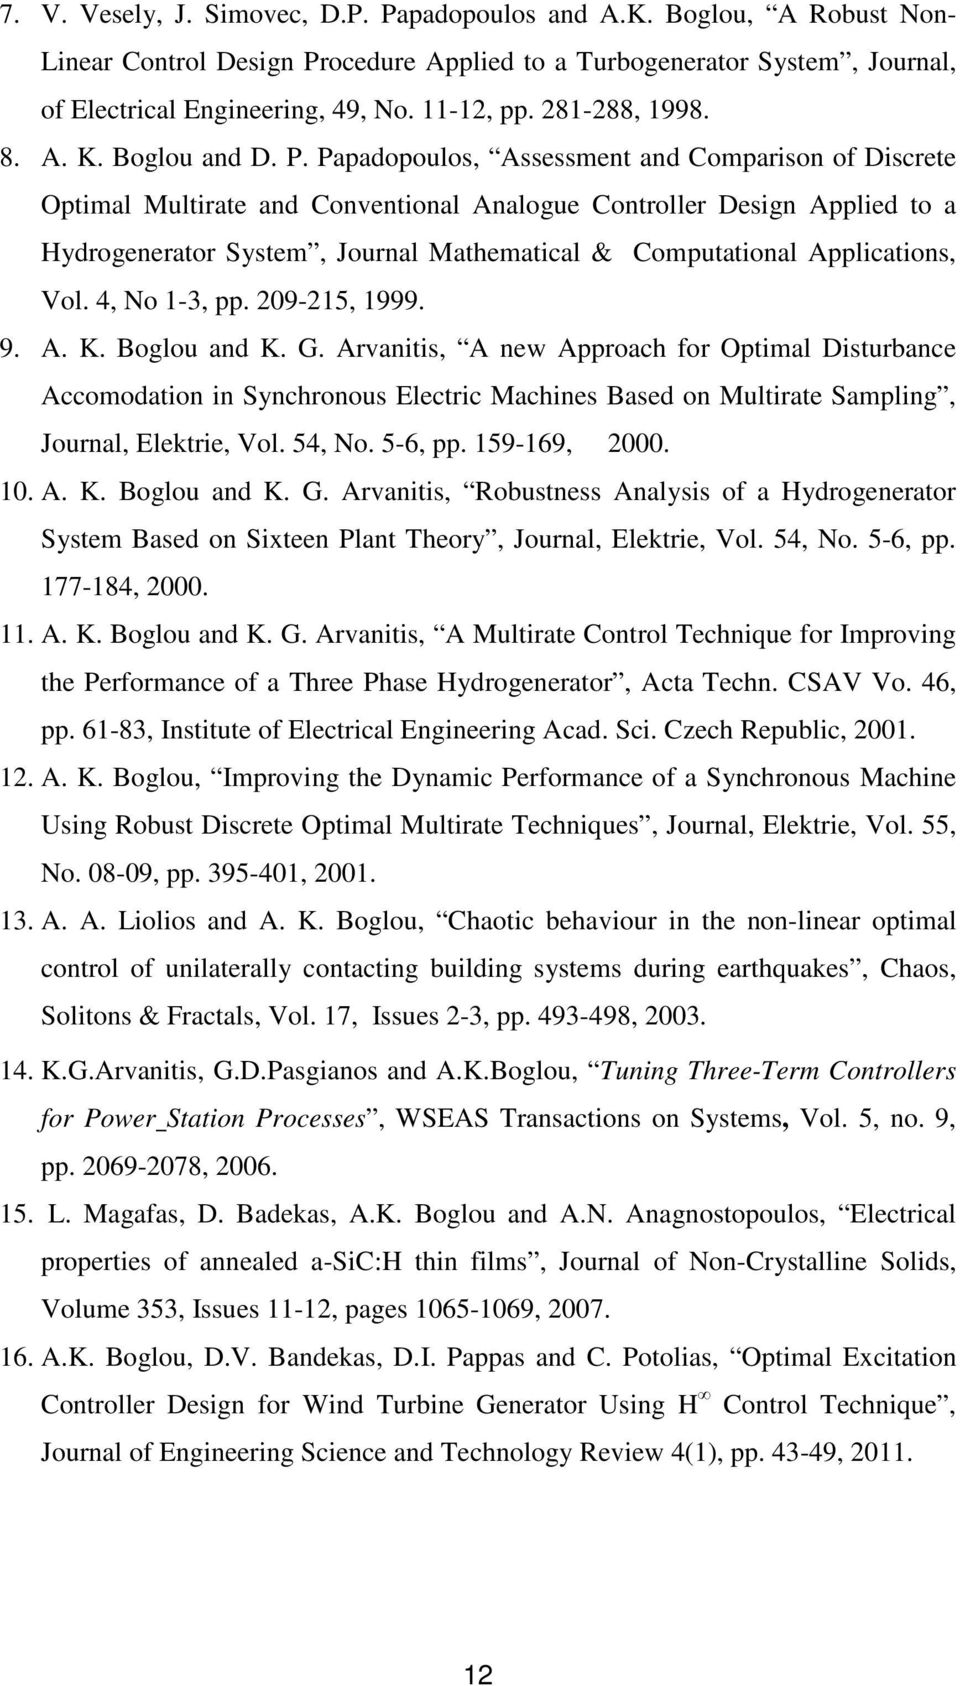 Papadopoulos, Assessment and Comparison of Discrete Optimal Multirate and Conventional Analogue Controller Design Applied to a Hydrogenerator System, Journal Mathematical & Computational